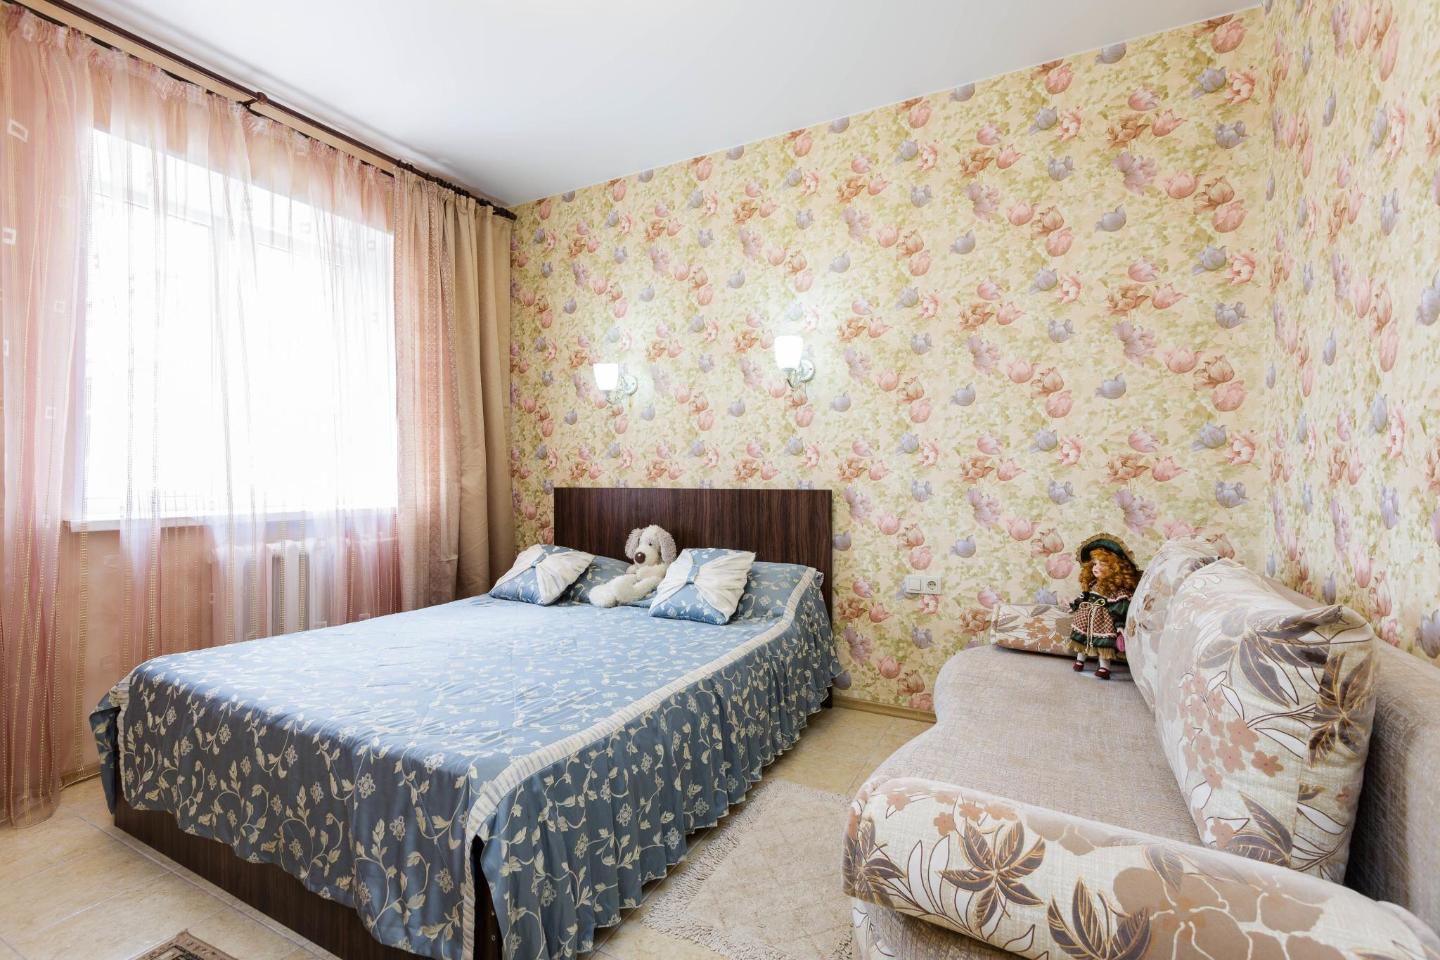 Recommended Apartments Hotels in Kazan